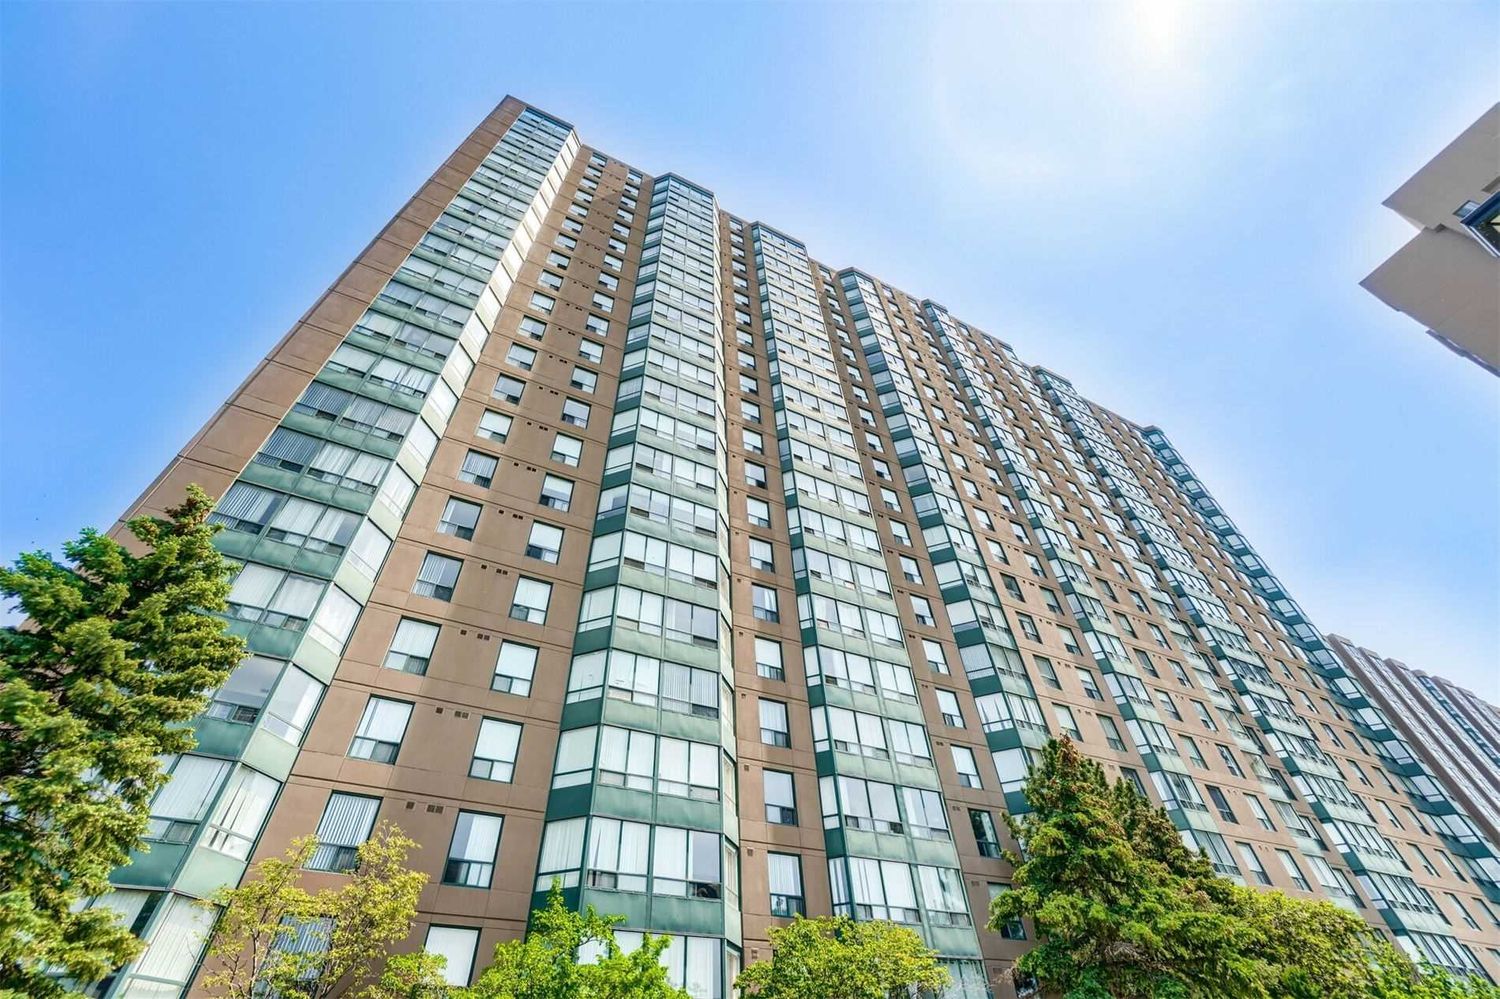 135 Hillcrest Avenue. Emerald Gate Condos is located in  Mississauga, Toronto - image #2 of 3